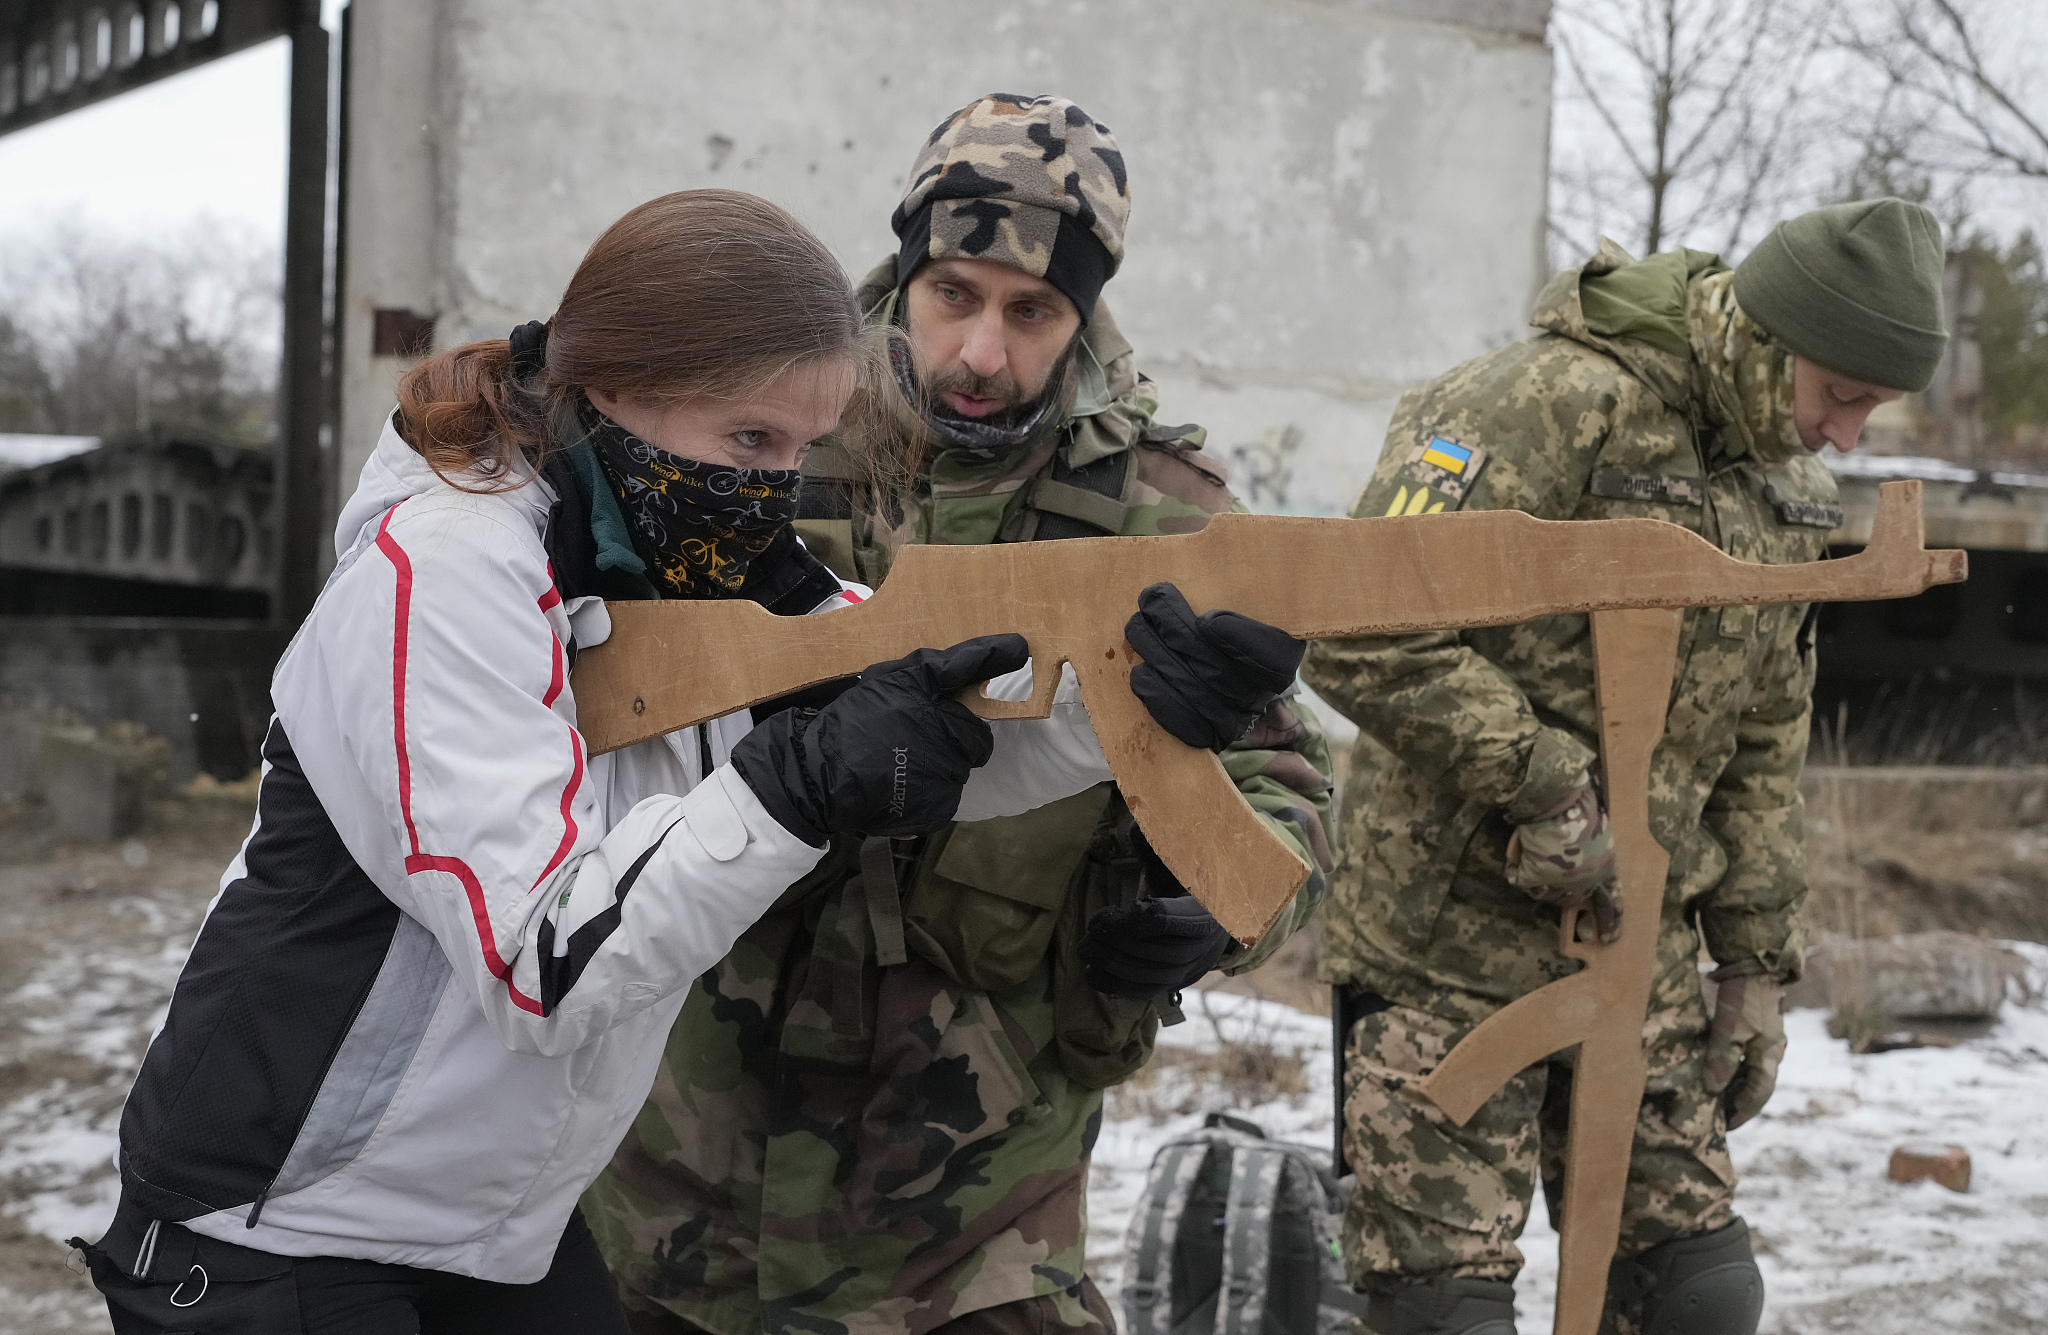 Just How Capable Is the Ukrainian Military? | The National Interest